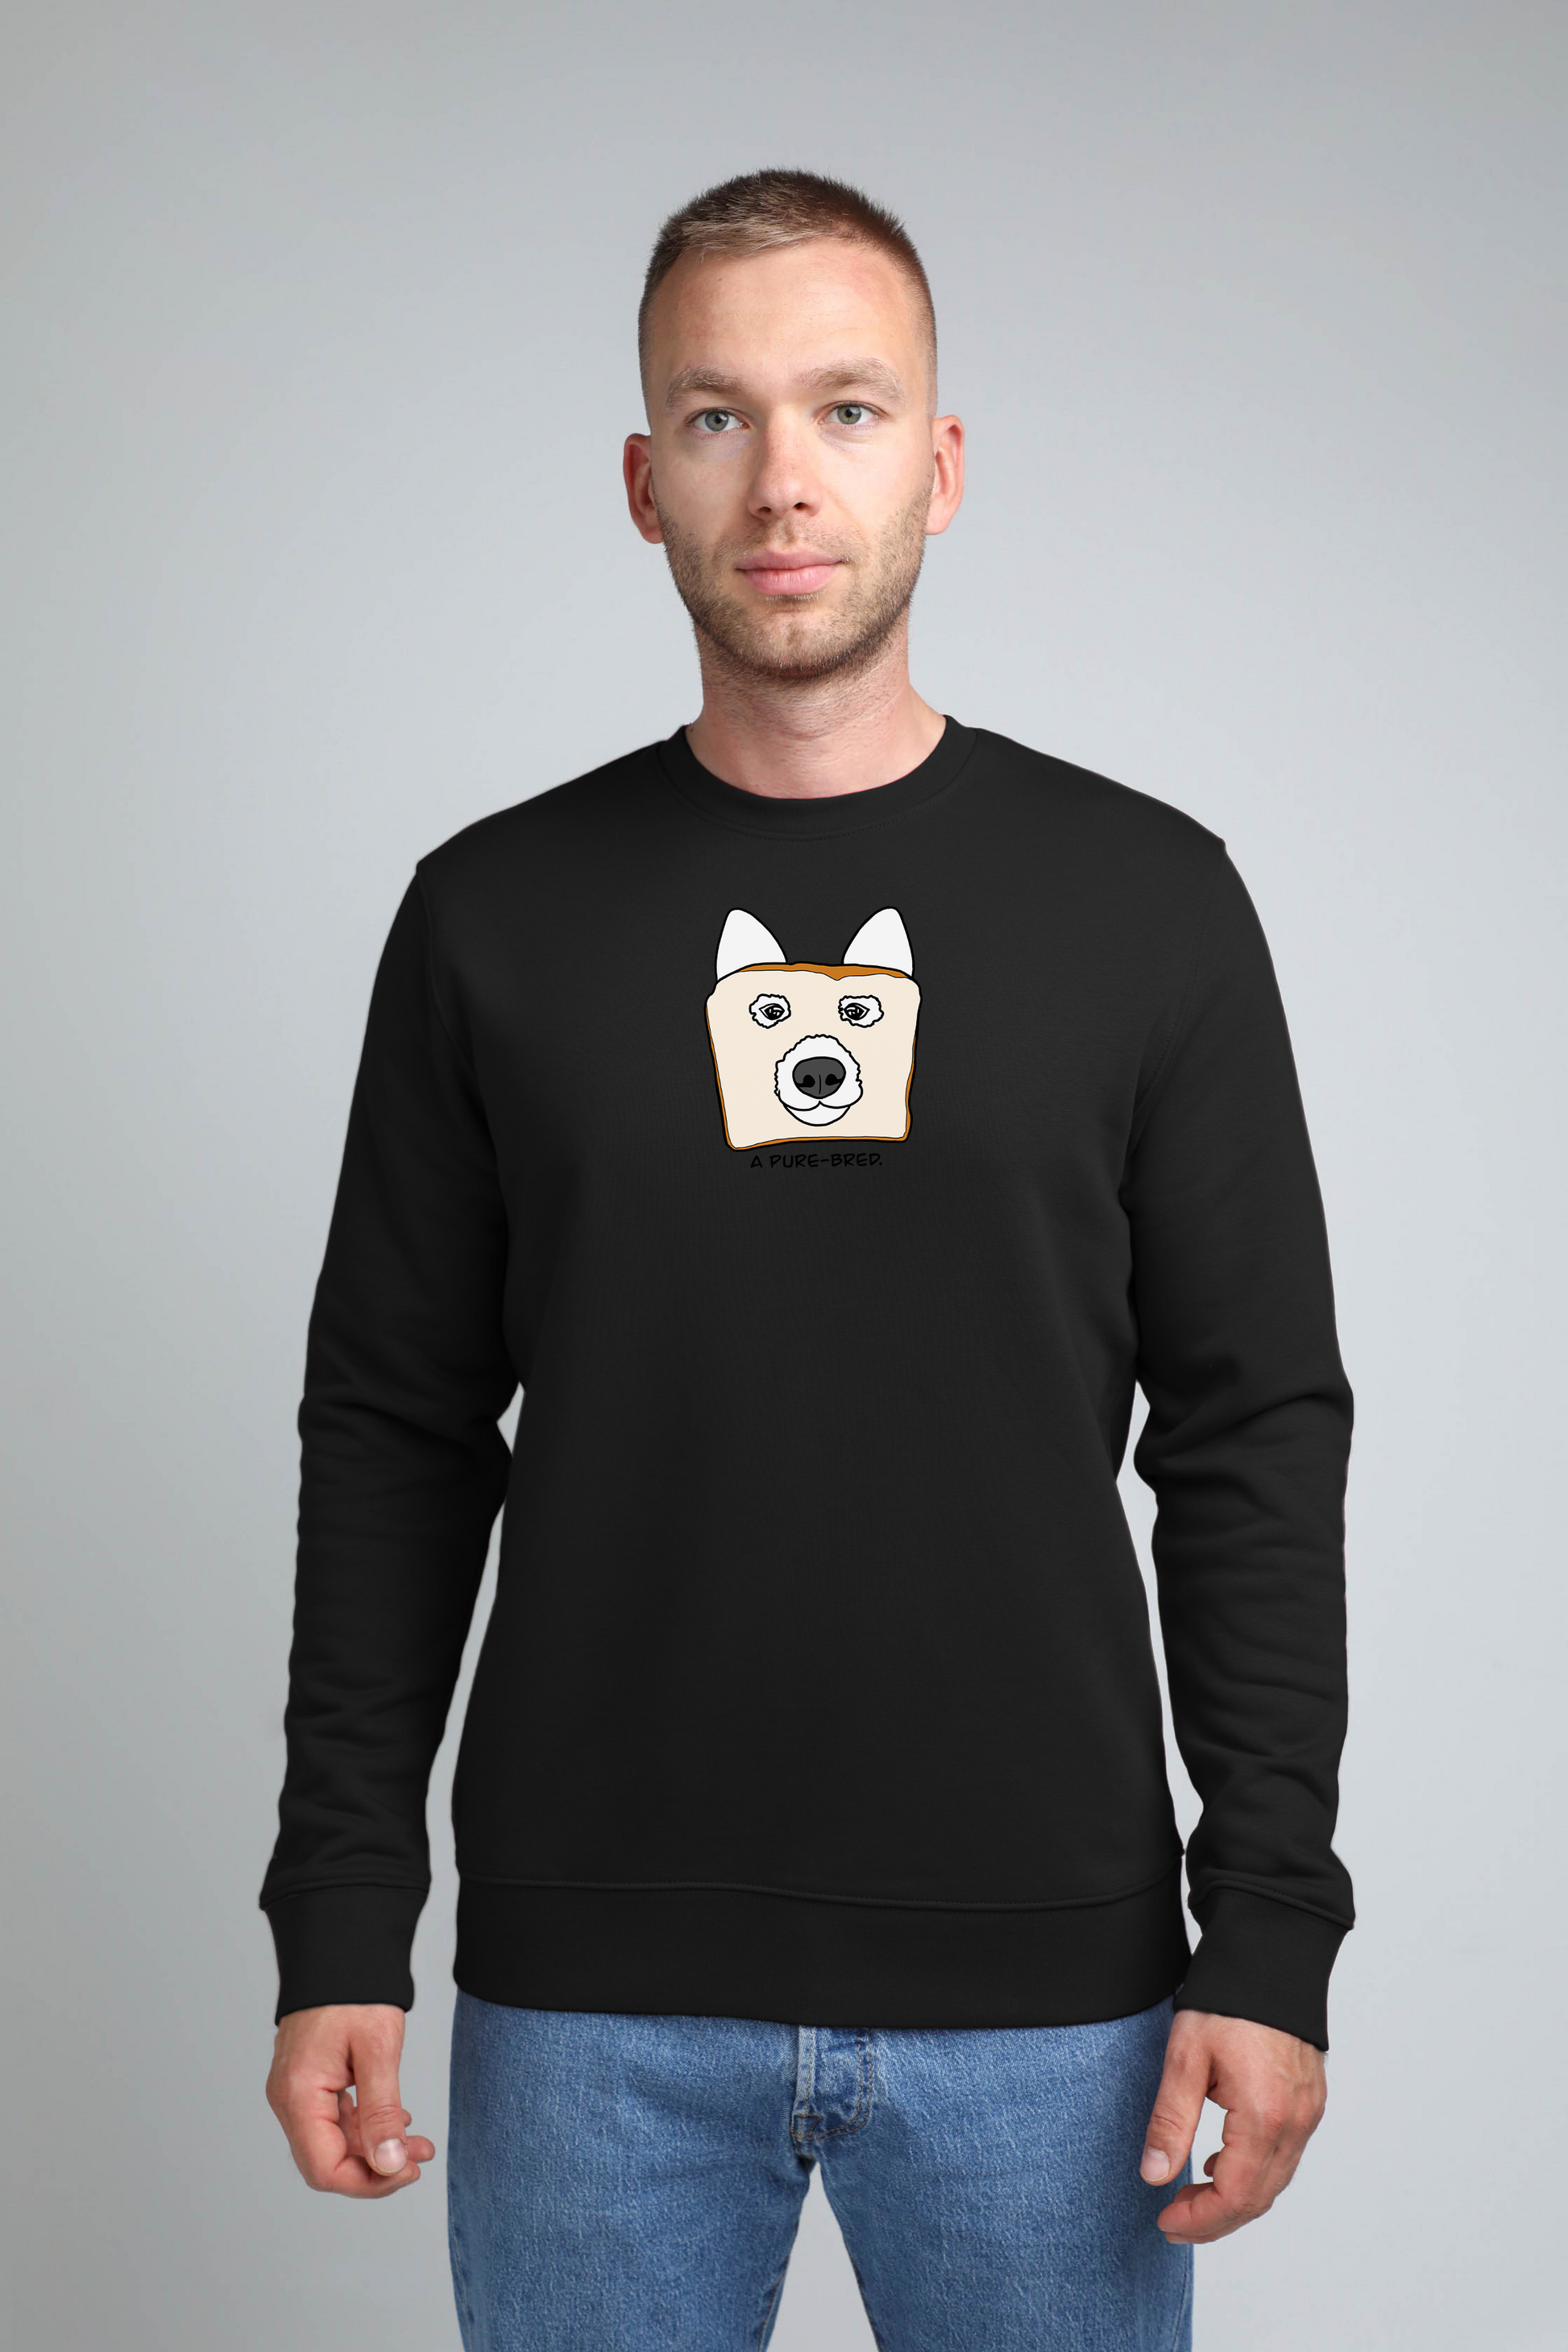 Pure-bred dog | Crew neck sweatshirt with dog. Regular fit | Unisex by My Wild Other